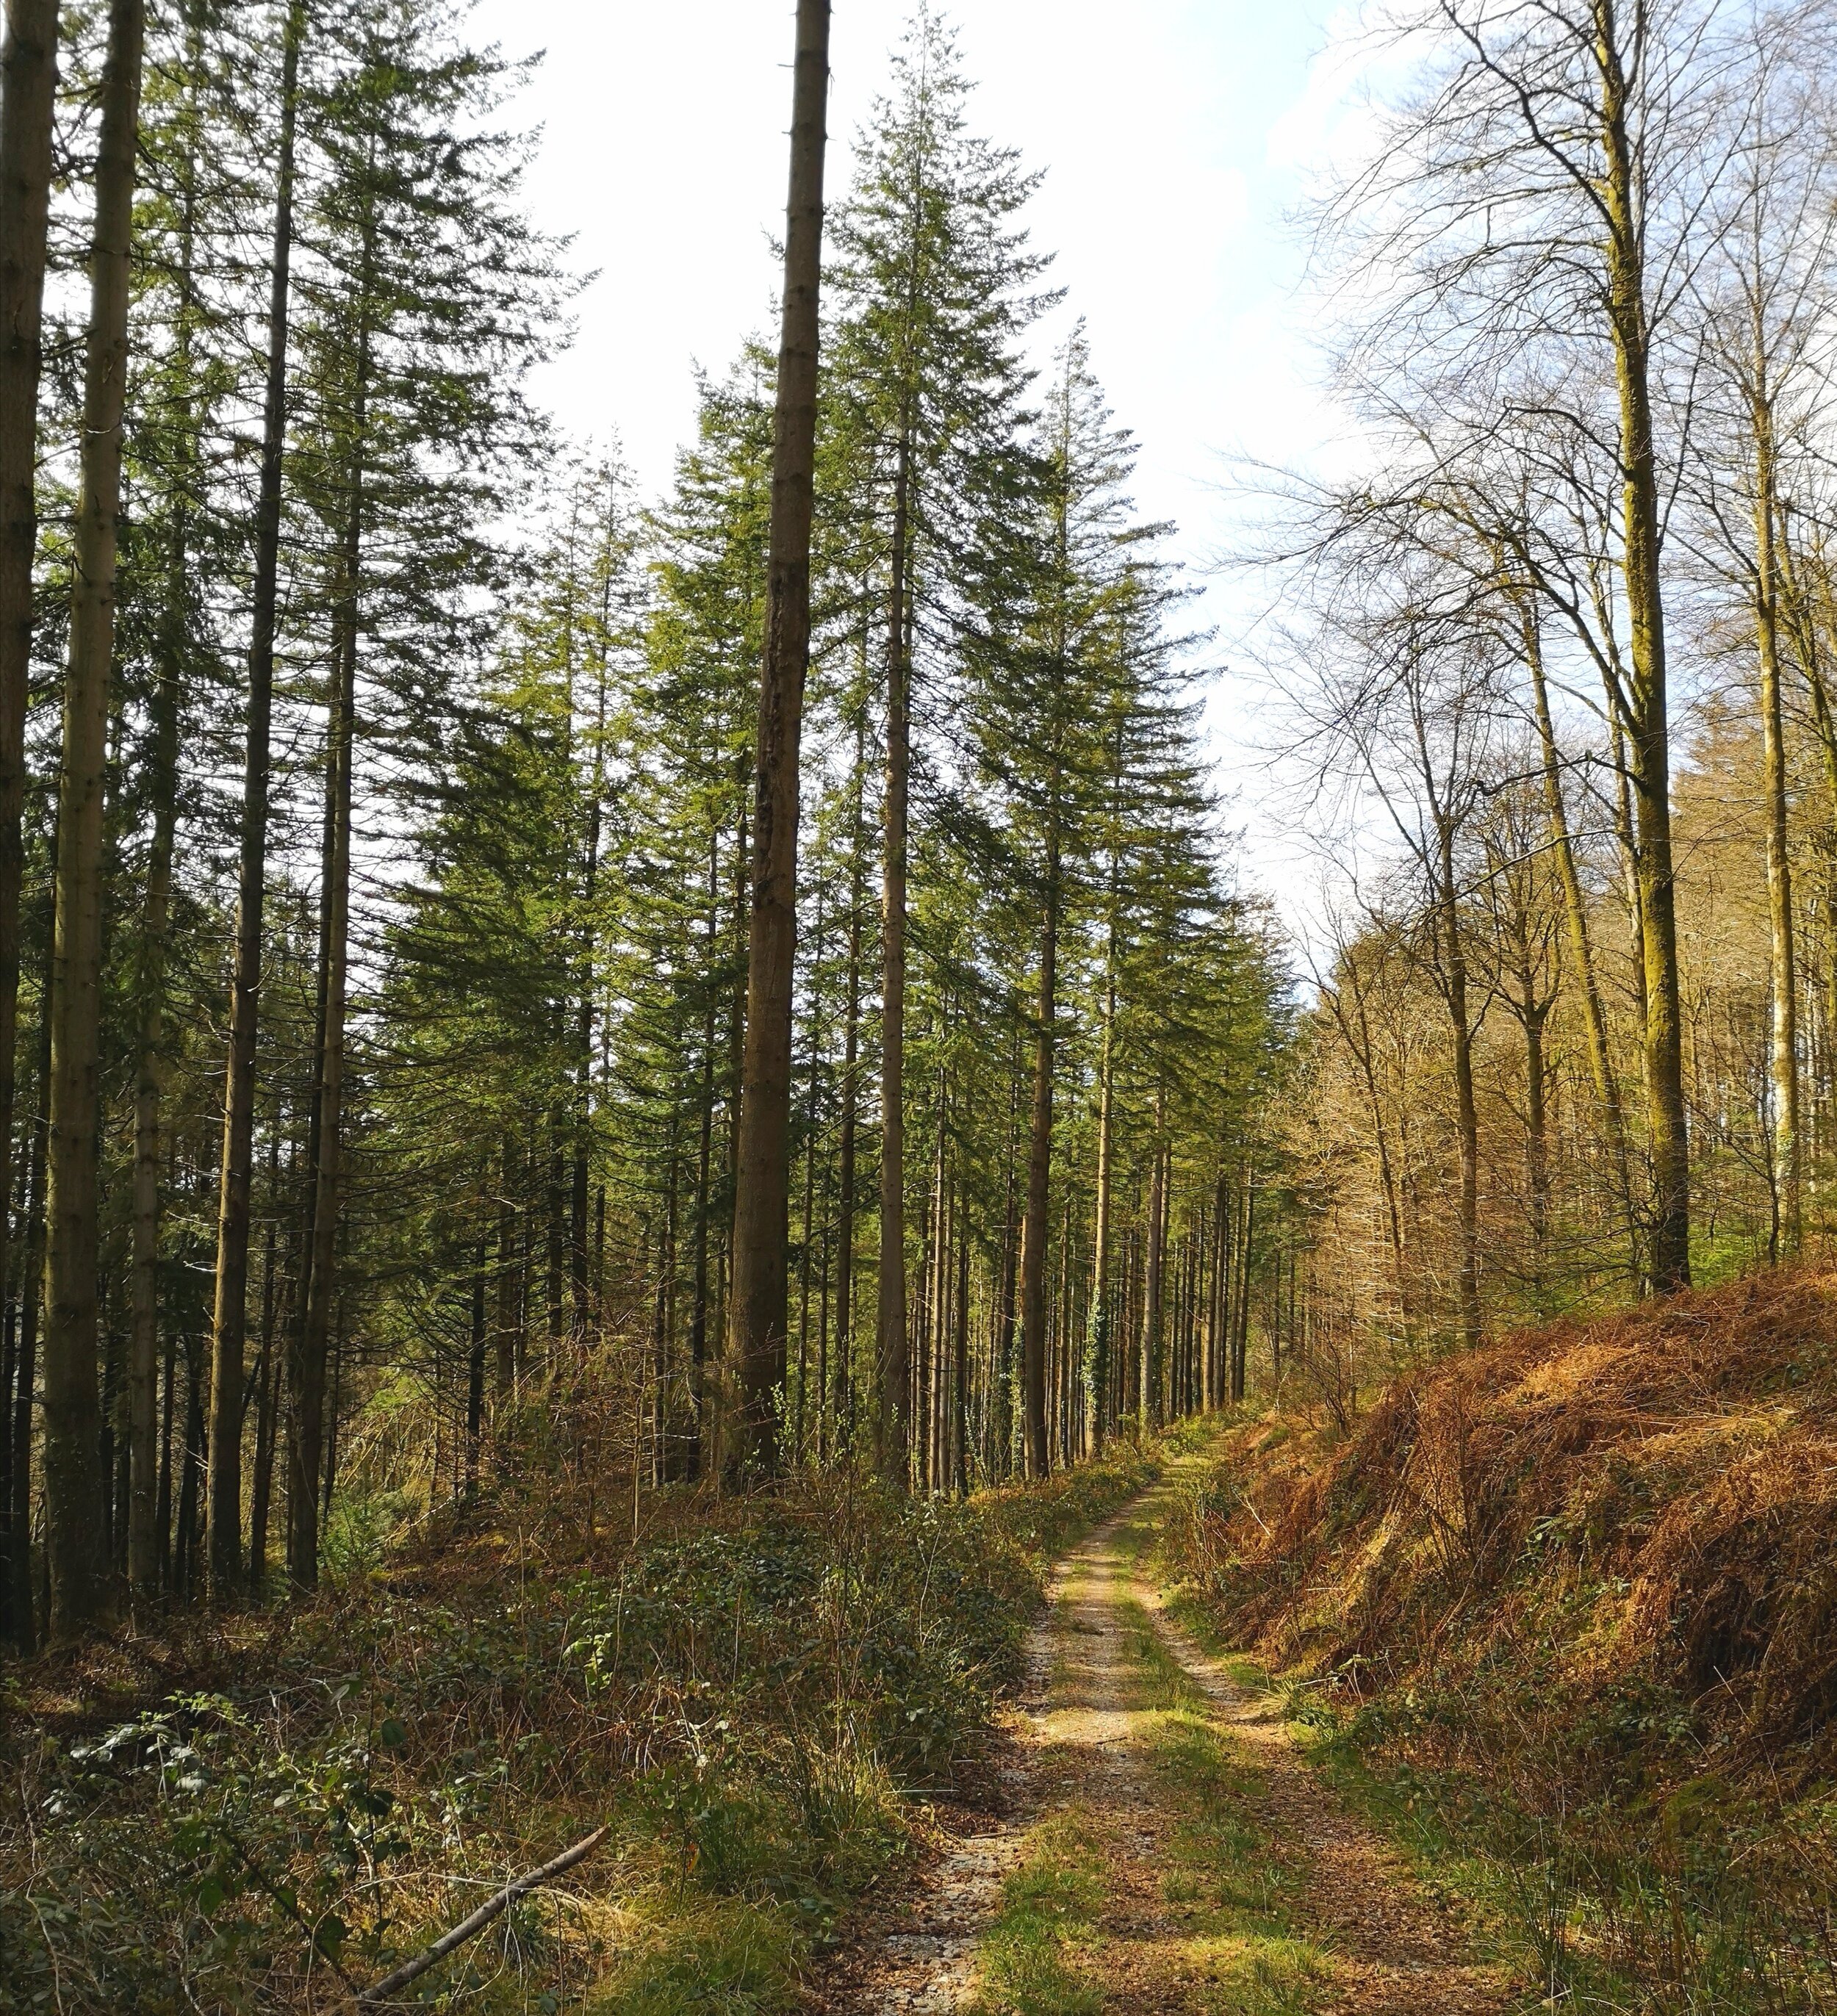 A stroll in Brechfa Forest from Glangwili Mansion